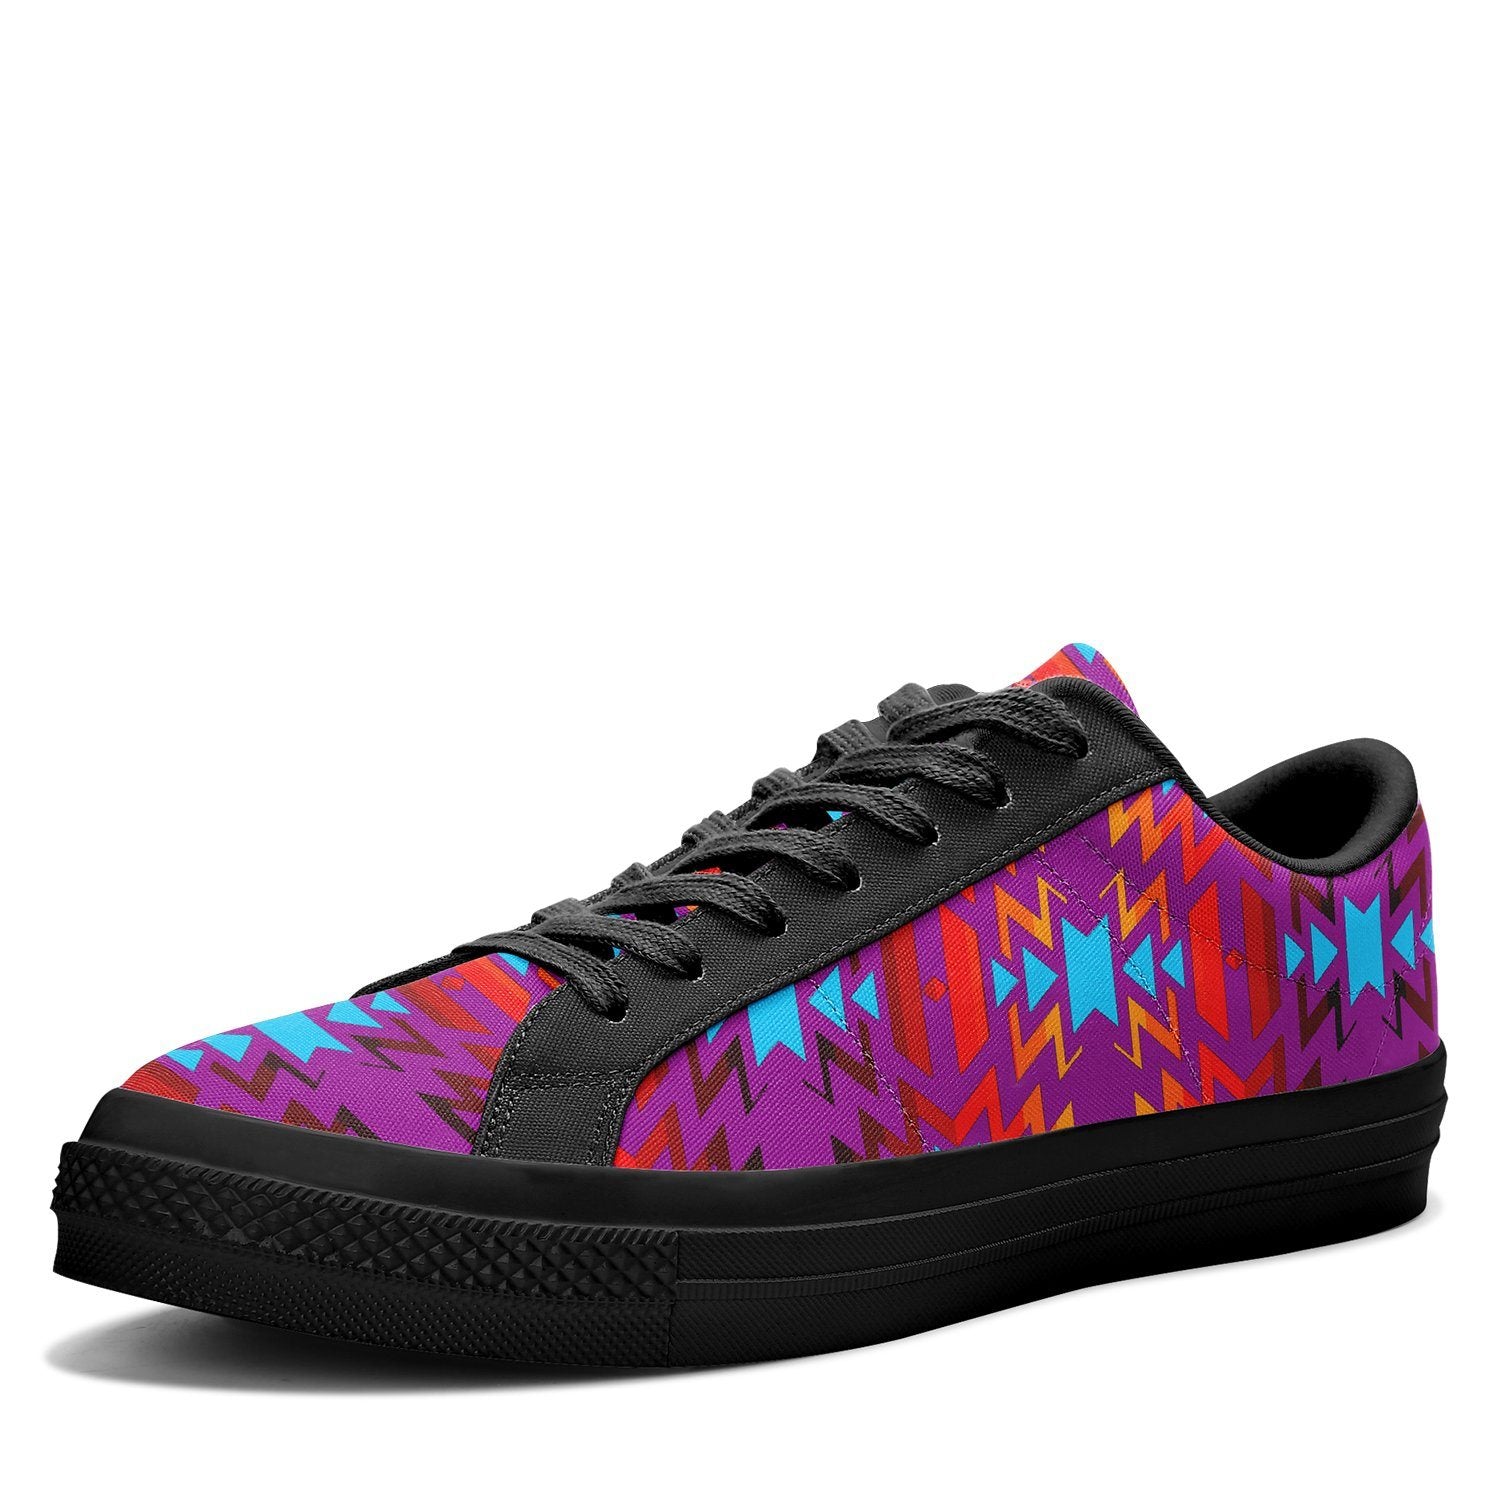 Big Pattern Fire Colors and Turquoise Purple Aapisi Low Top Canvas Shoes Black Sole 49 Dzine 